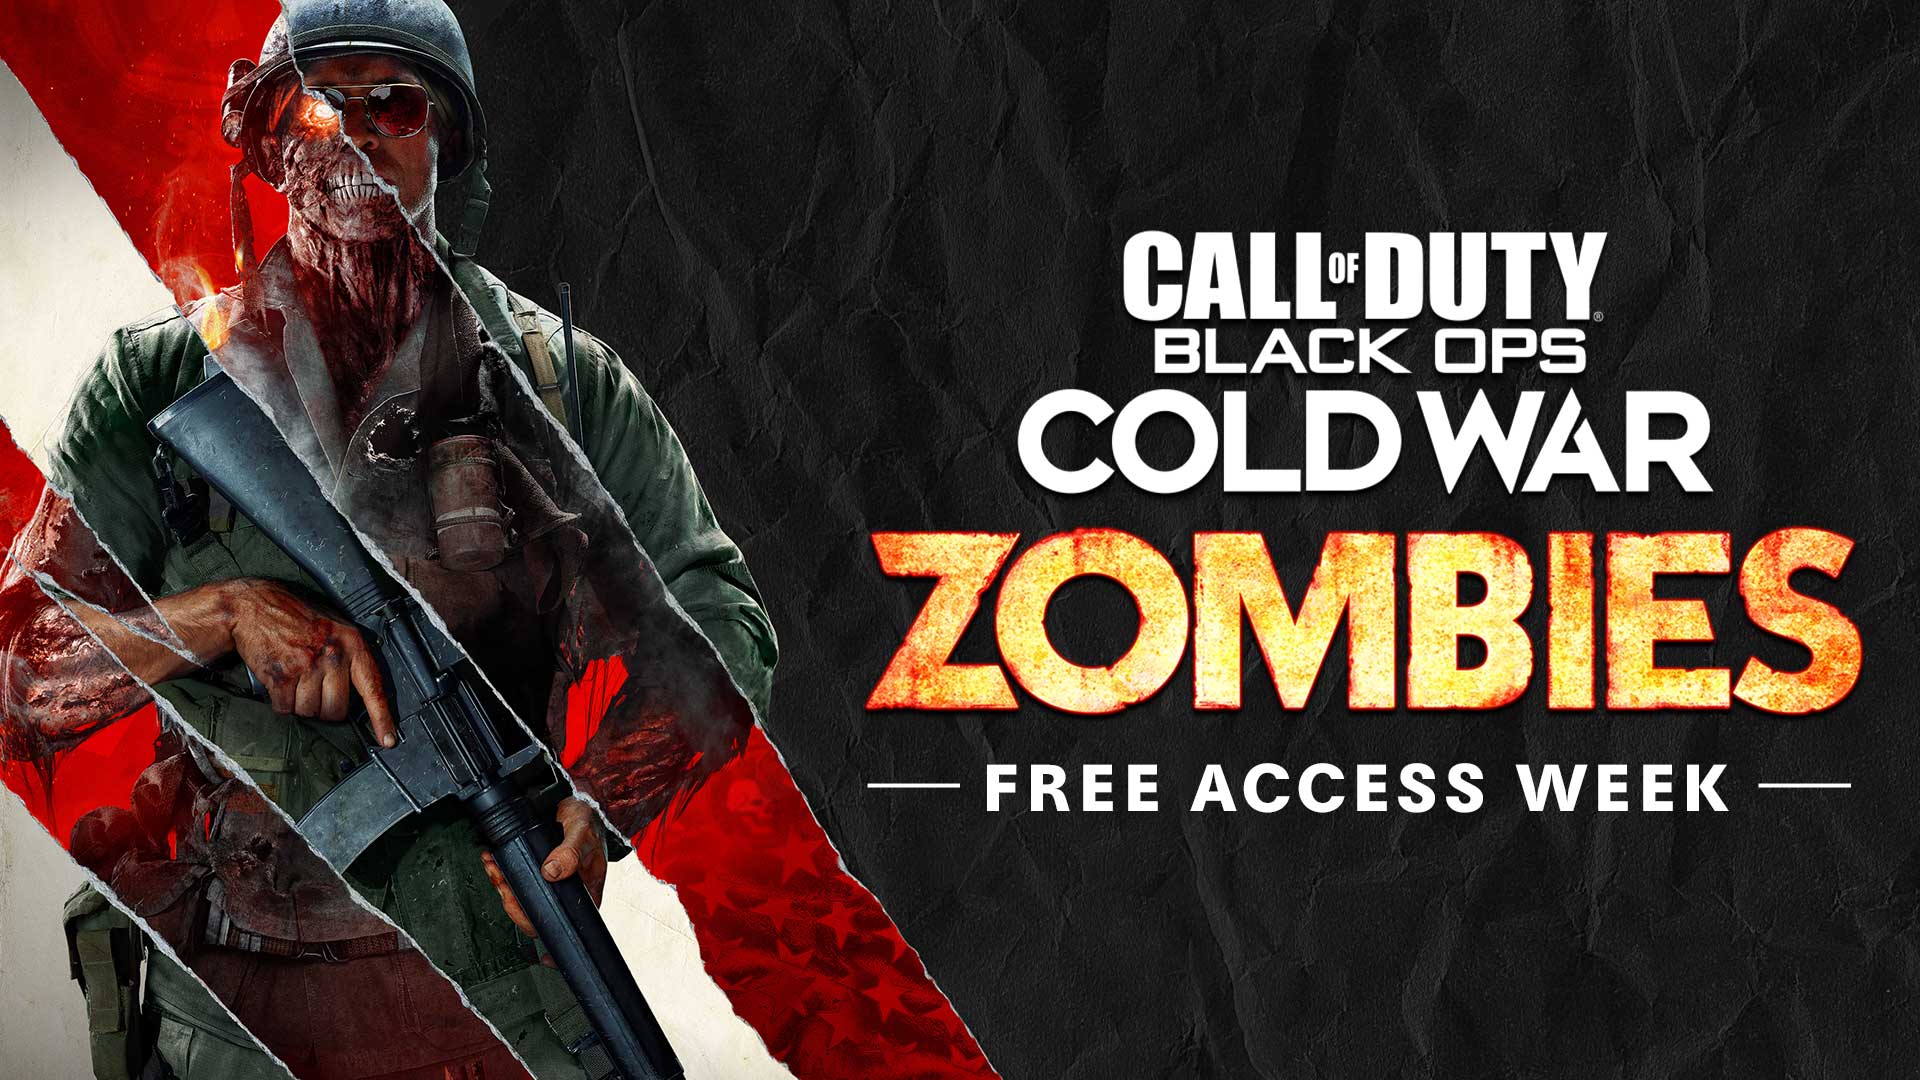 Call of Duty: Black Ops Cold War Zombies gratis